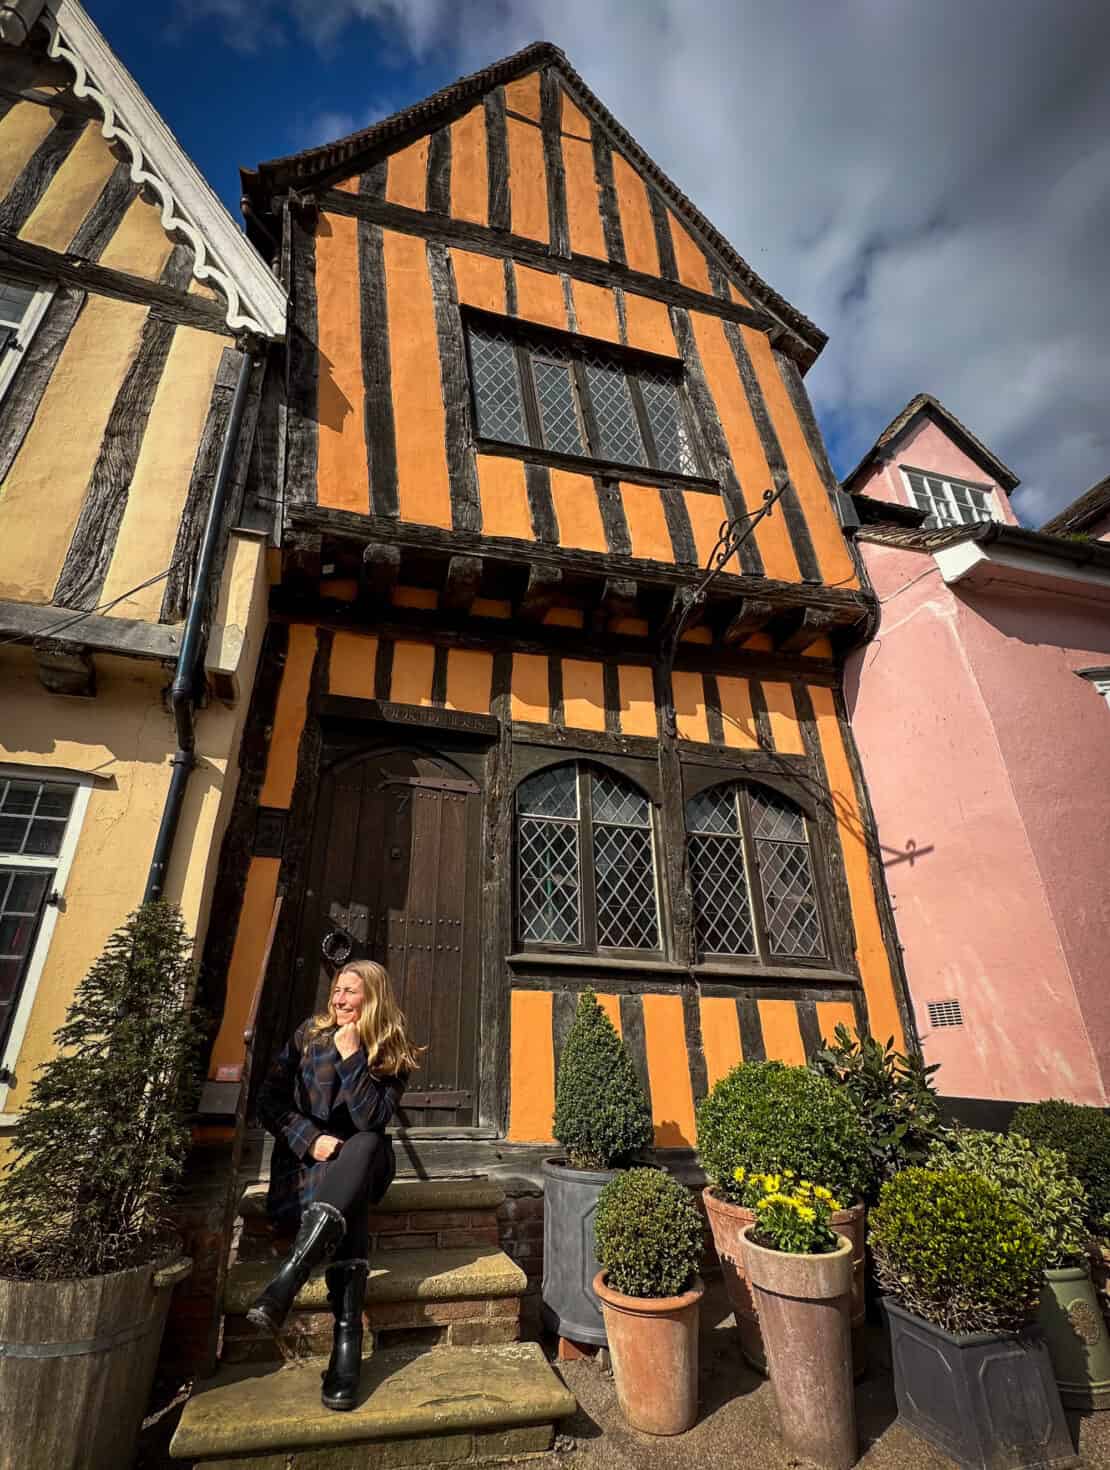 Abigail King at the Crooked House in Lavenham